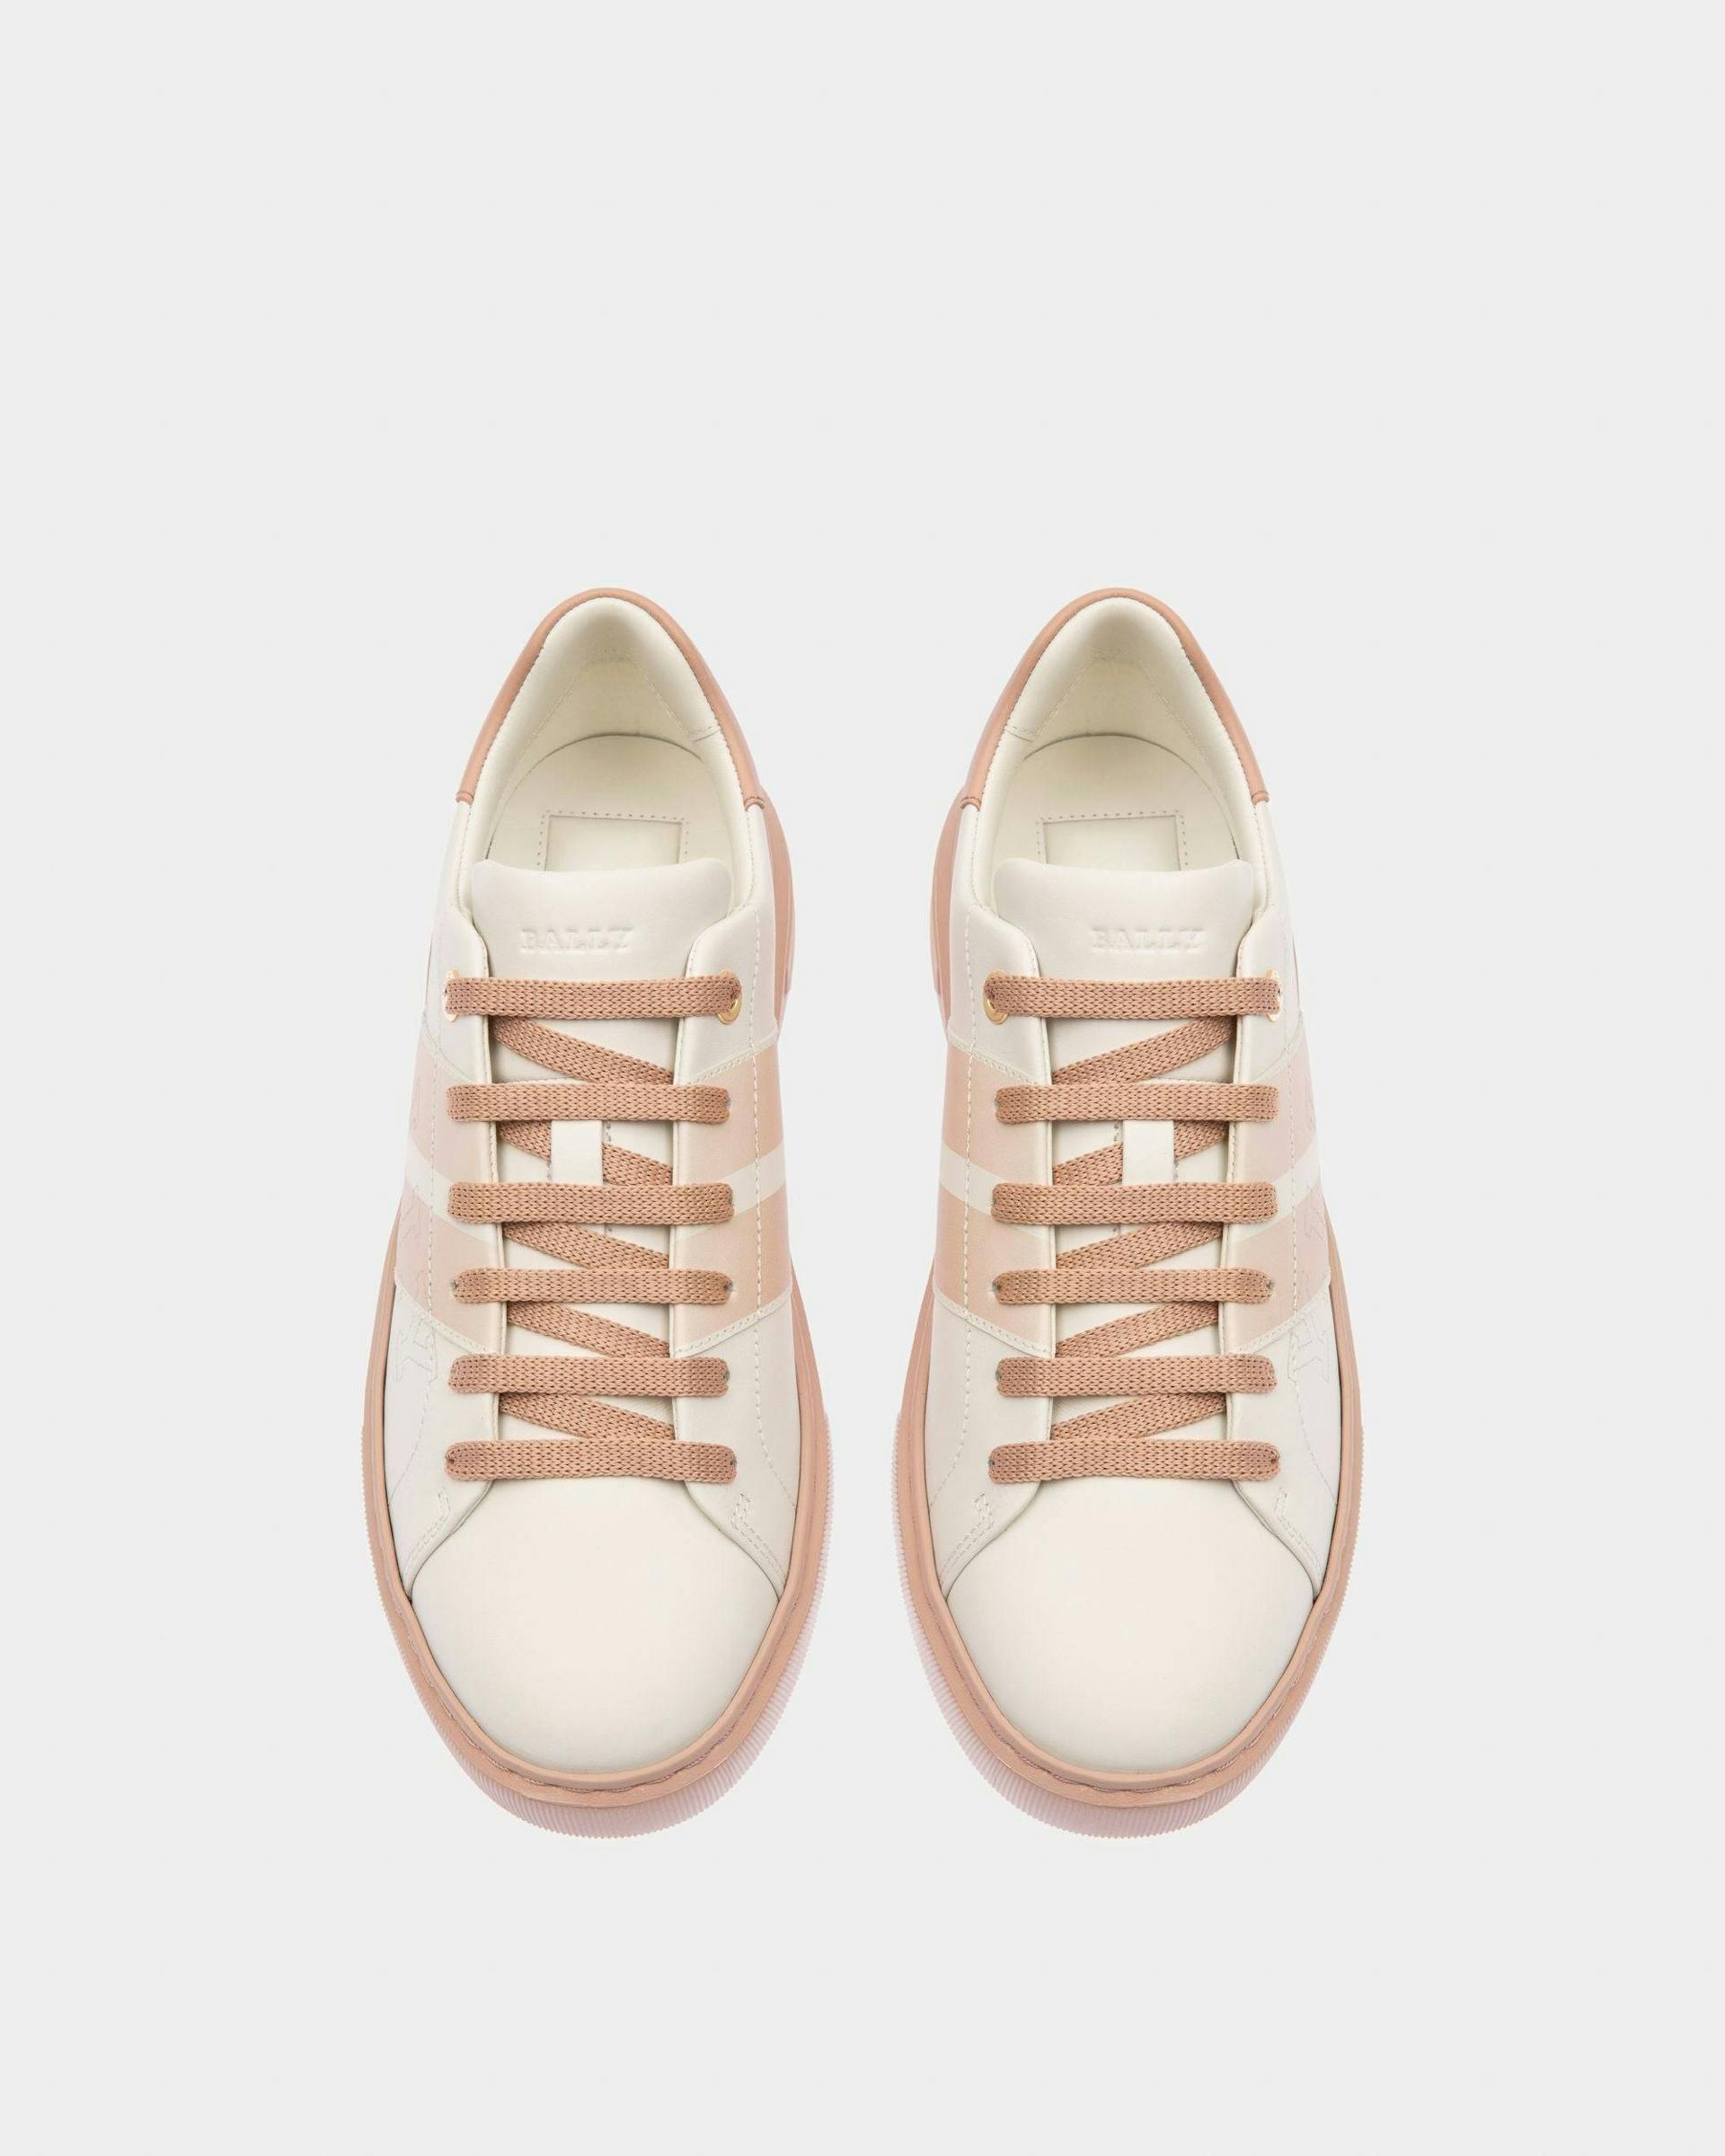 Myra Leather Sneakers In White & Pink - Women's - Bally - 02